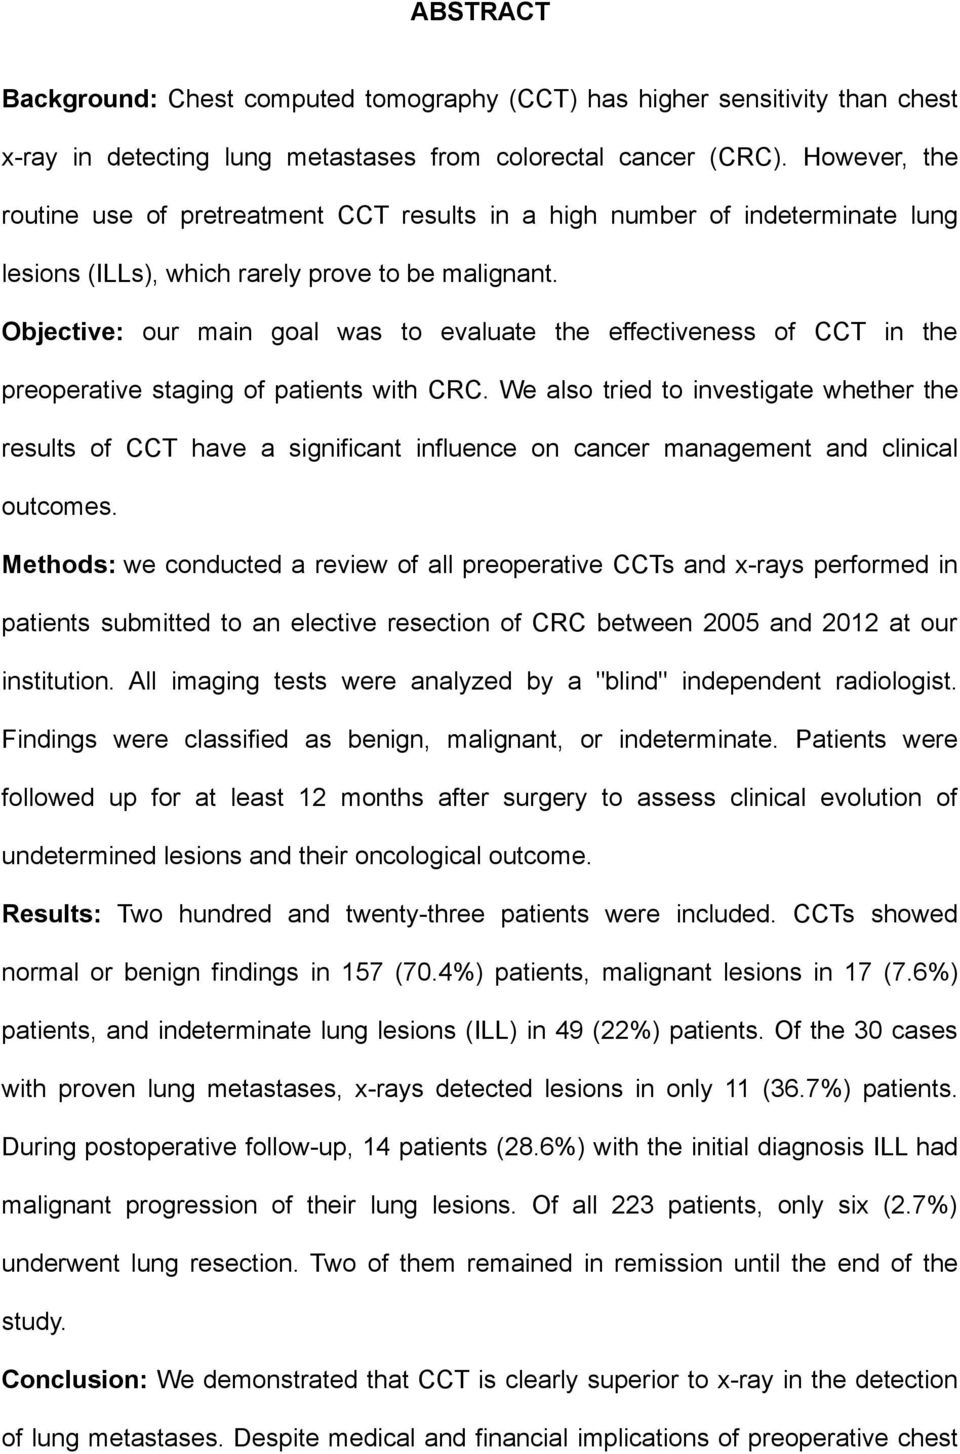 Objective: our main goal was to evaluate the effectiveness of CCT in the preoperative staging of patients with CRC.